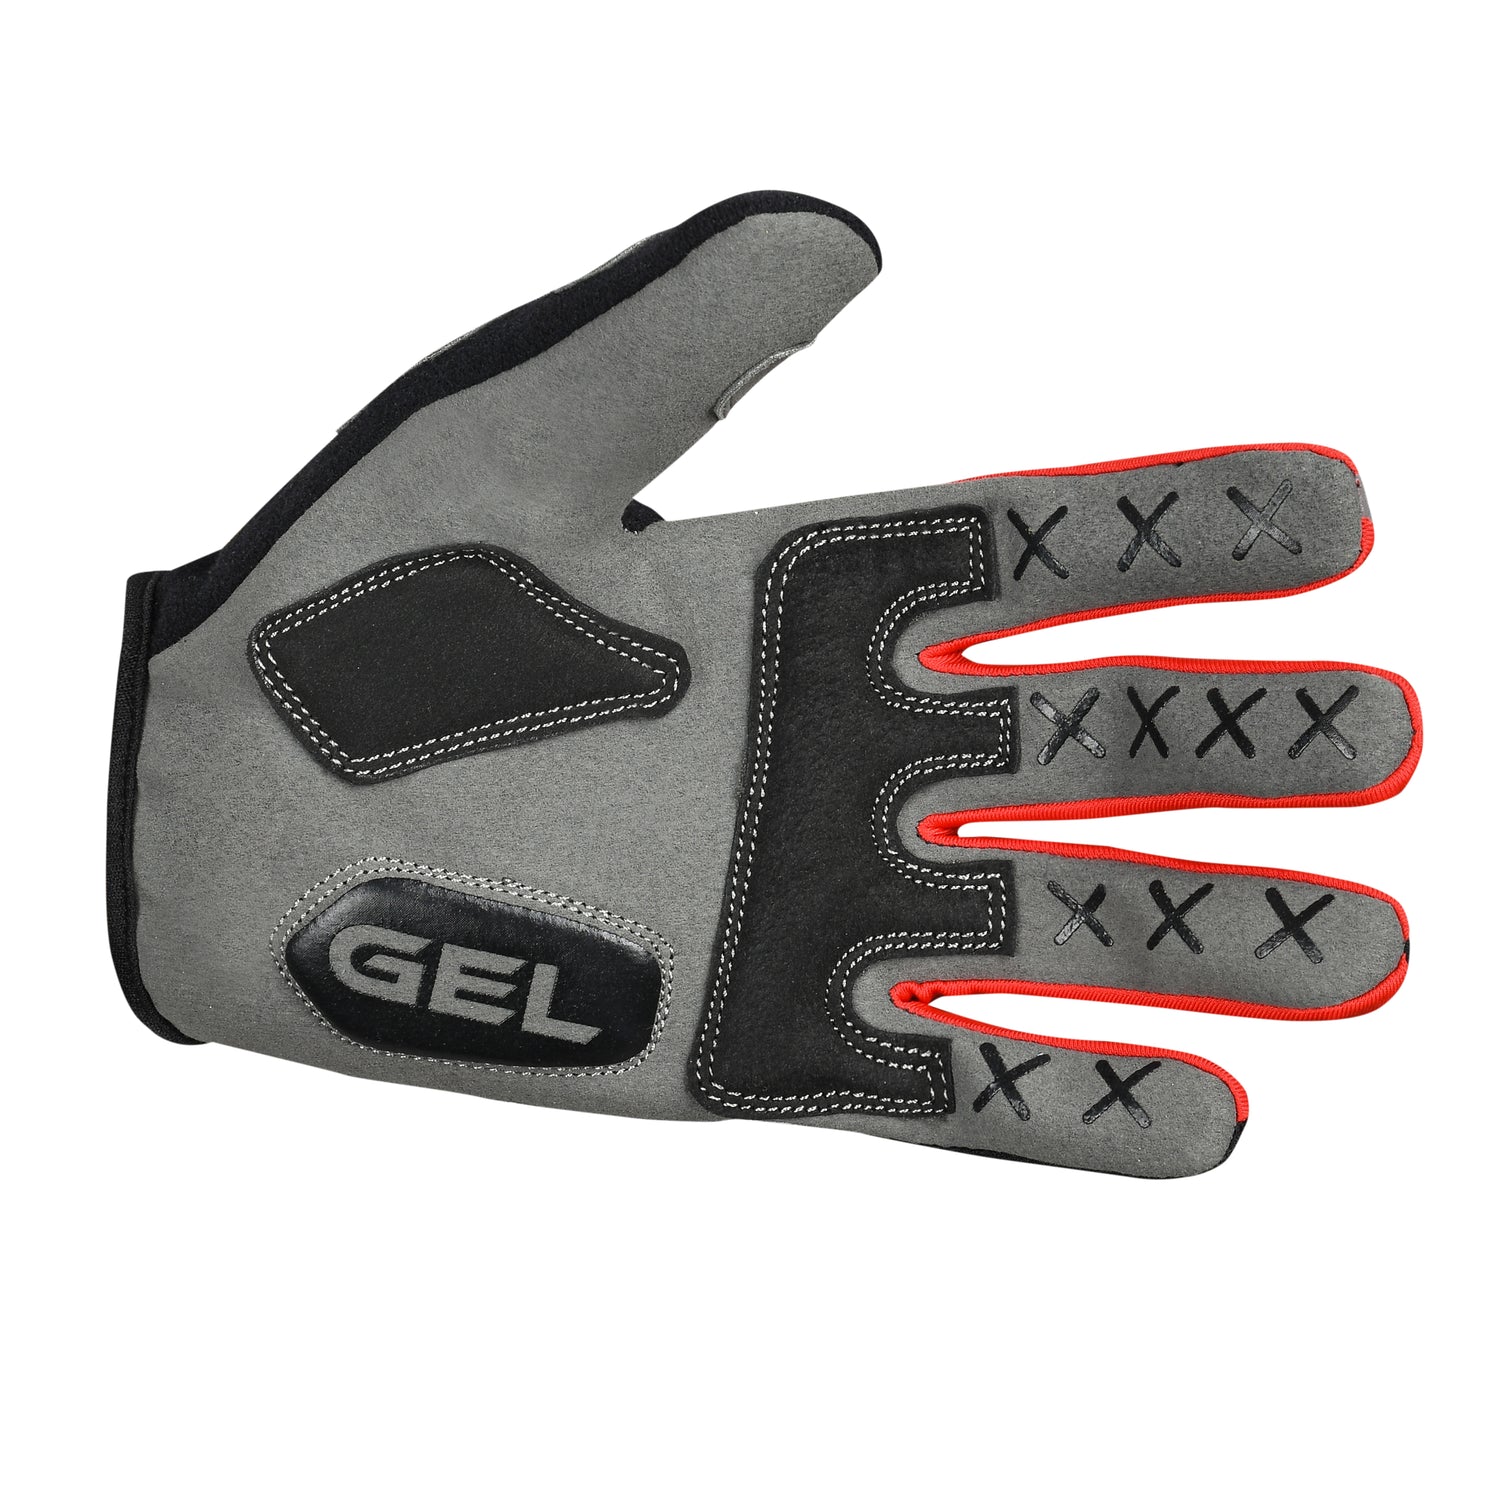 Retro Cycling Glove: Classic Style for Timeless Rides - Vintage-inspired design, comfort, and durability for a stylish cycling experience